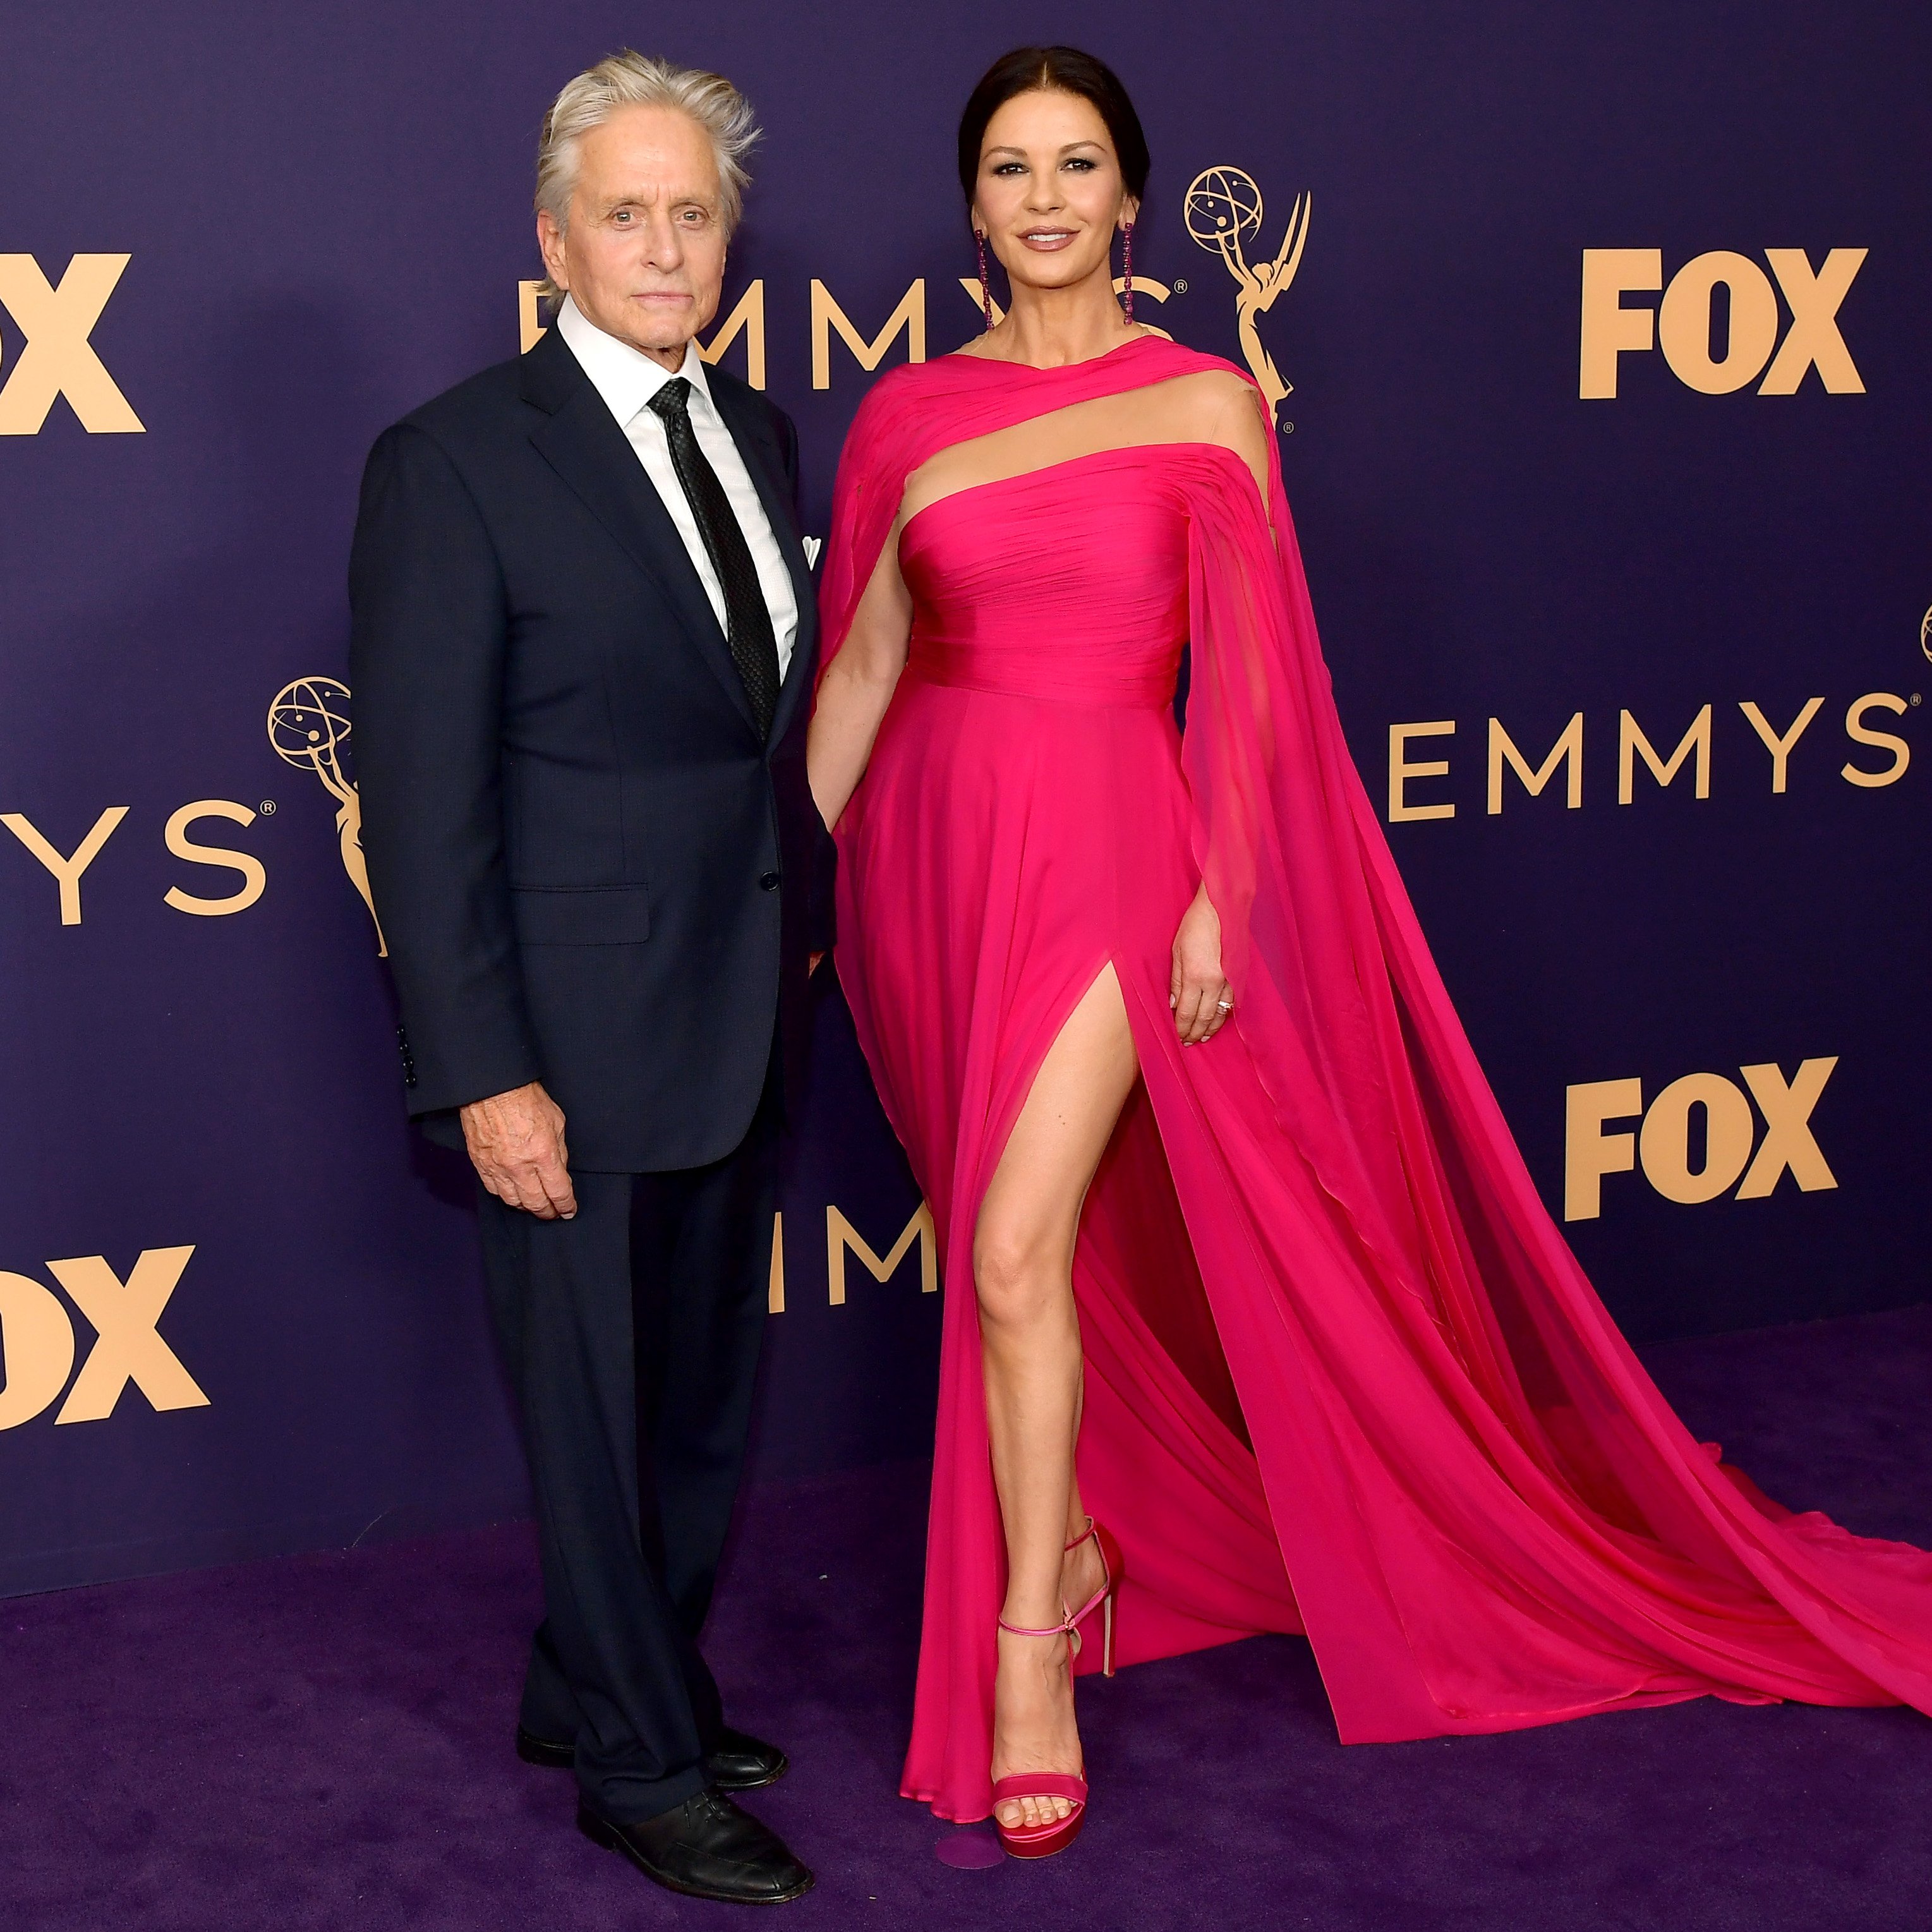 Michael Douglas  and Catherine Zeta-Jones attend the 71st Emmy Awards on September 22, 2019 in Los Angeles, California | Photo: Getty Images